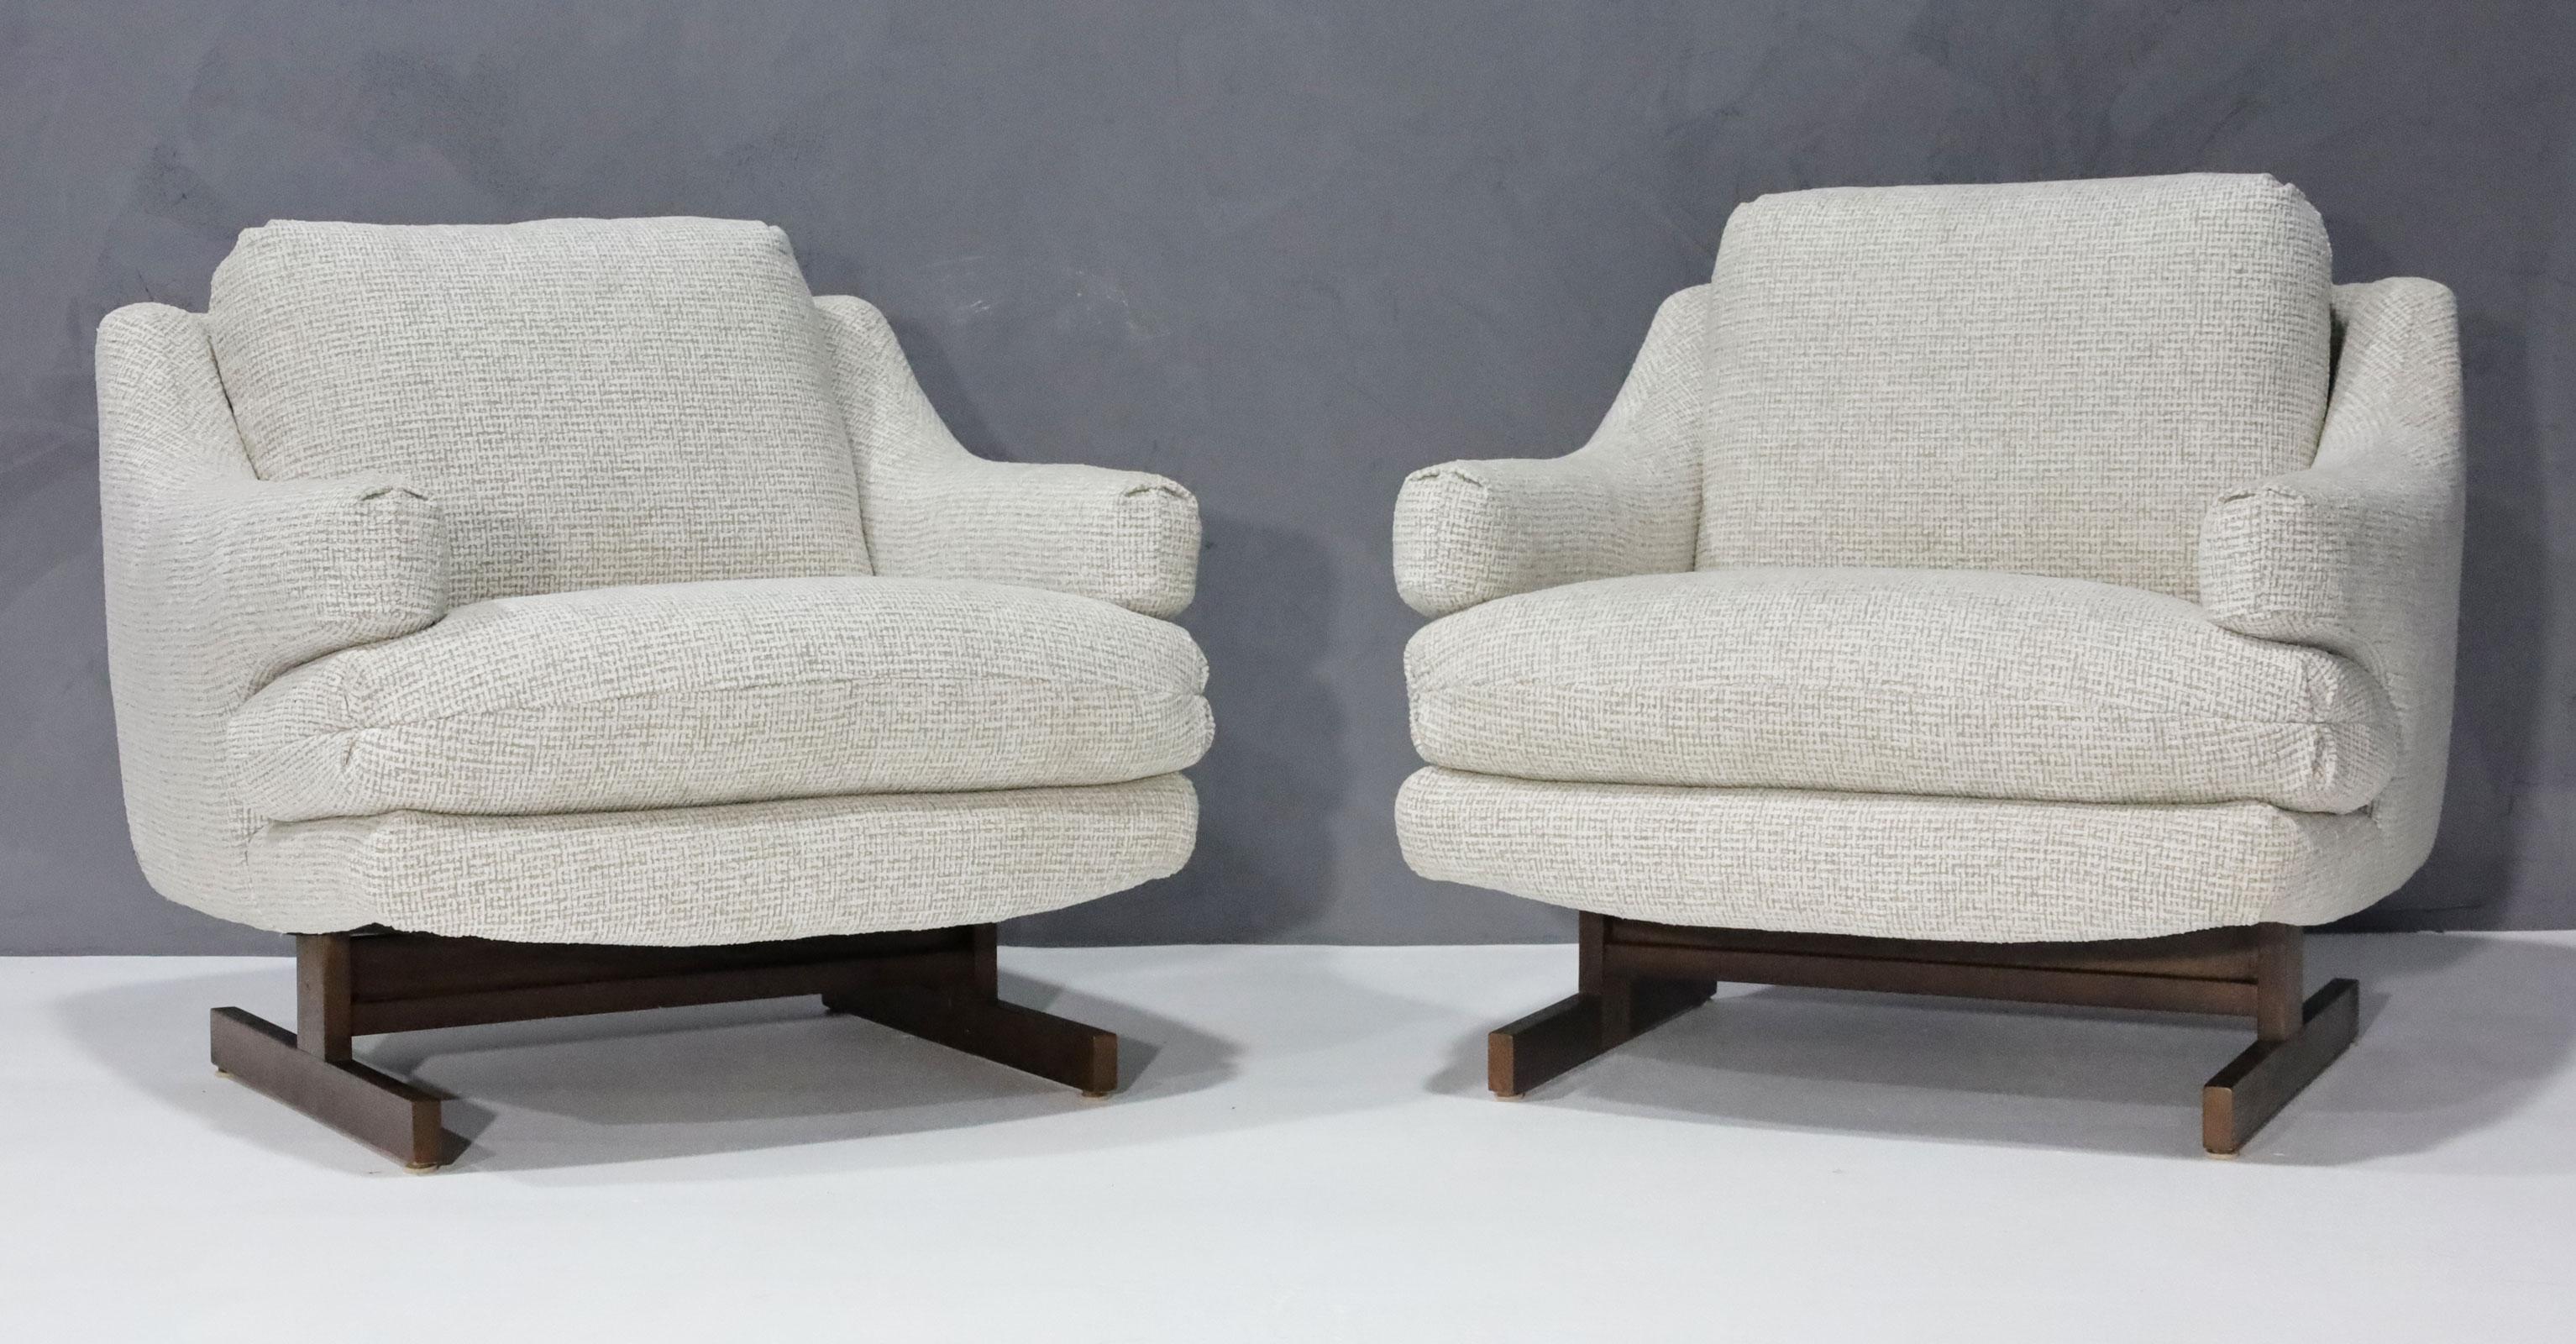 A fairly rare design in the style of Milo Baughman by O. B. Solie for Bernhardt/Flair. They have new upholstery in a chenille fabric of high quality. The bases are walnut and in a T-leg configuration. The chairs are very comfortable and have a great